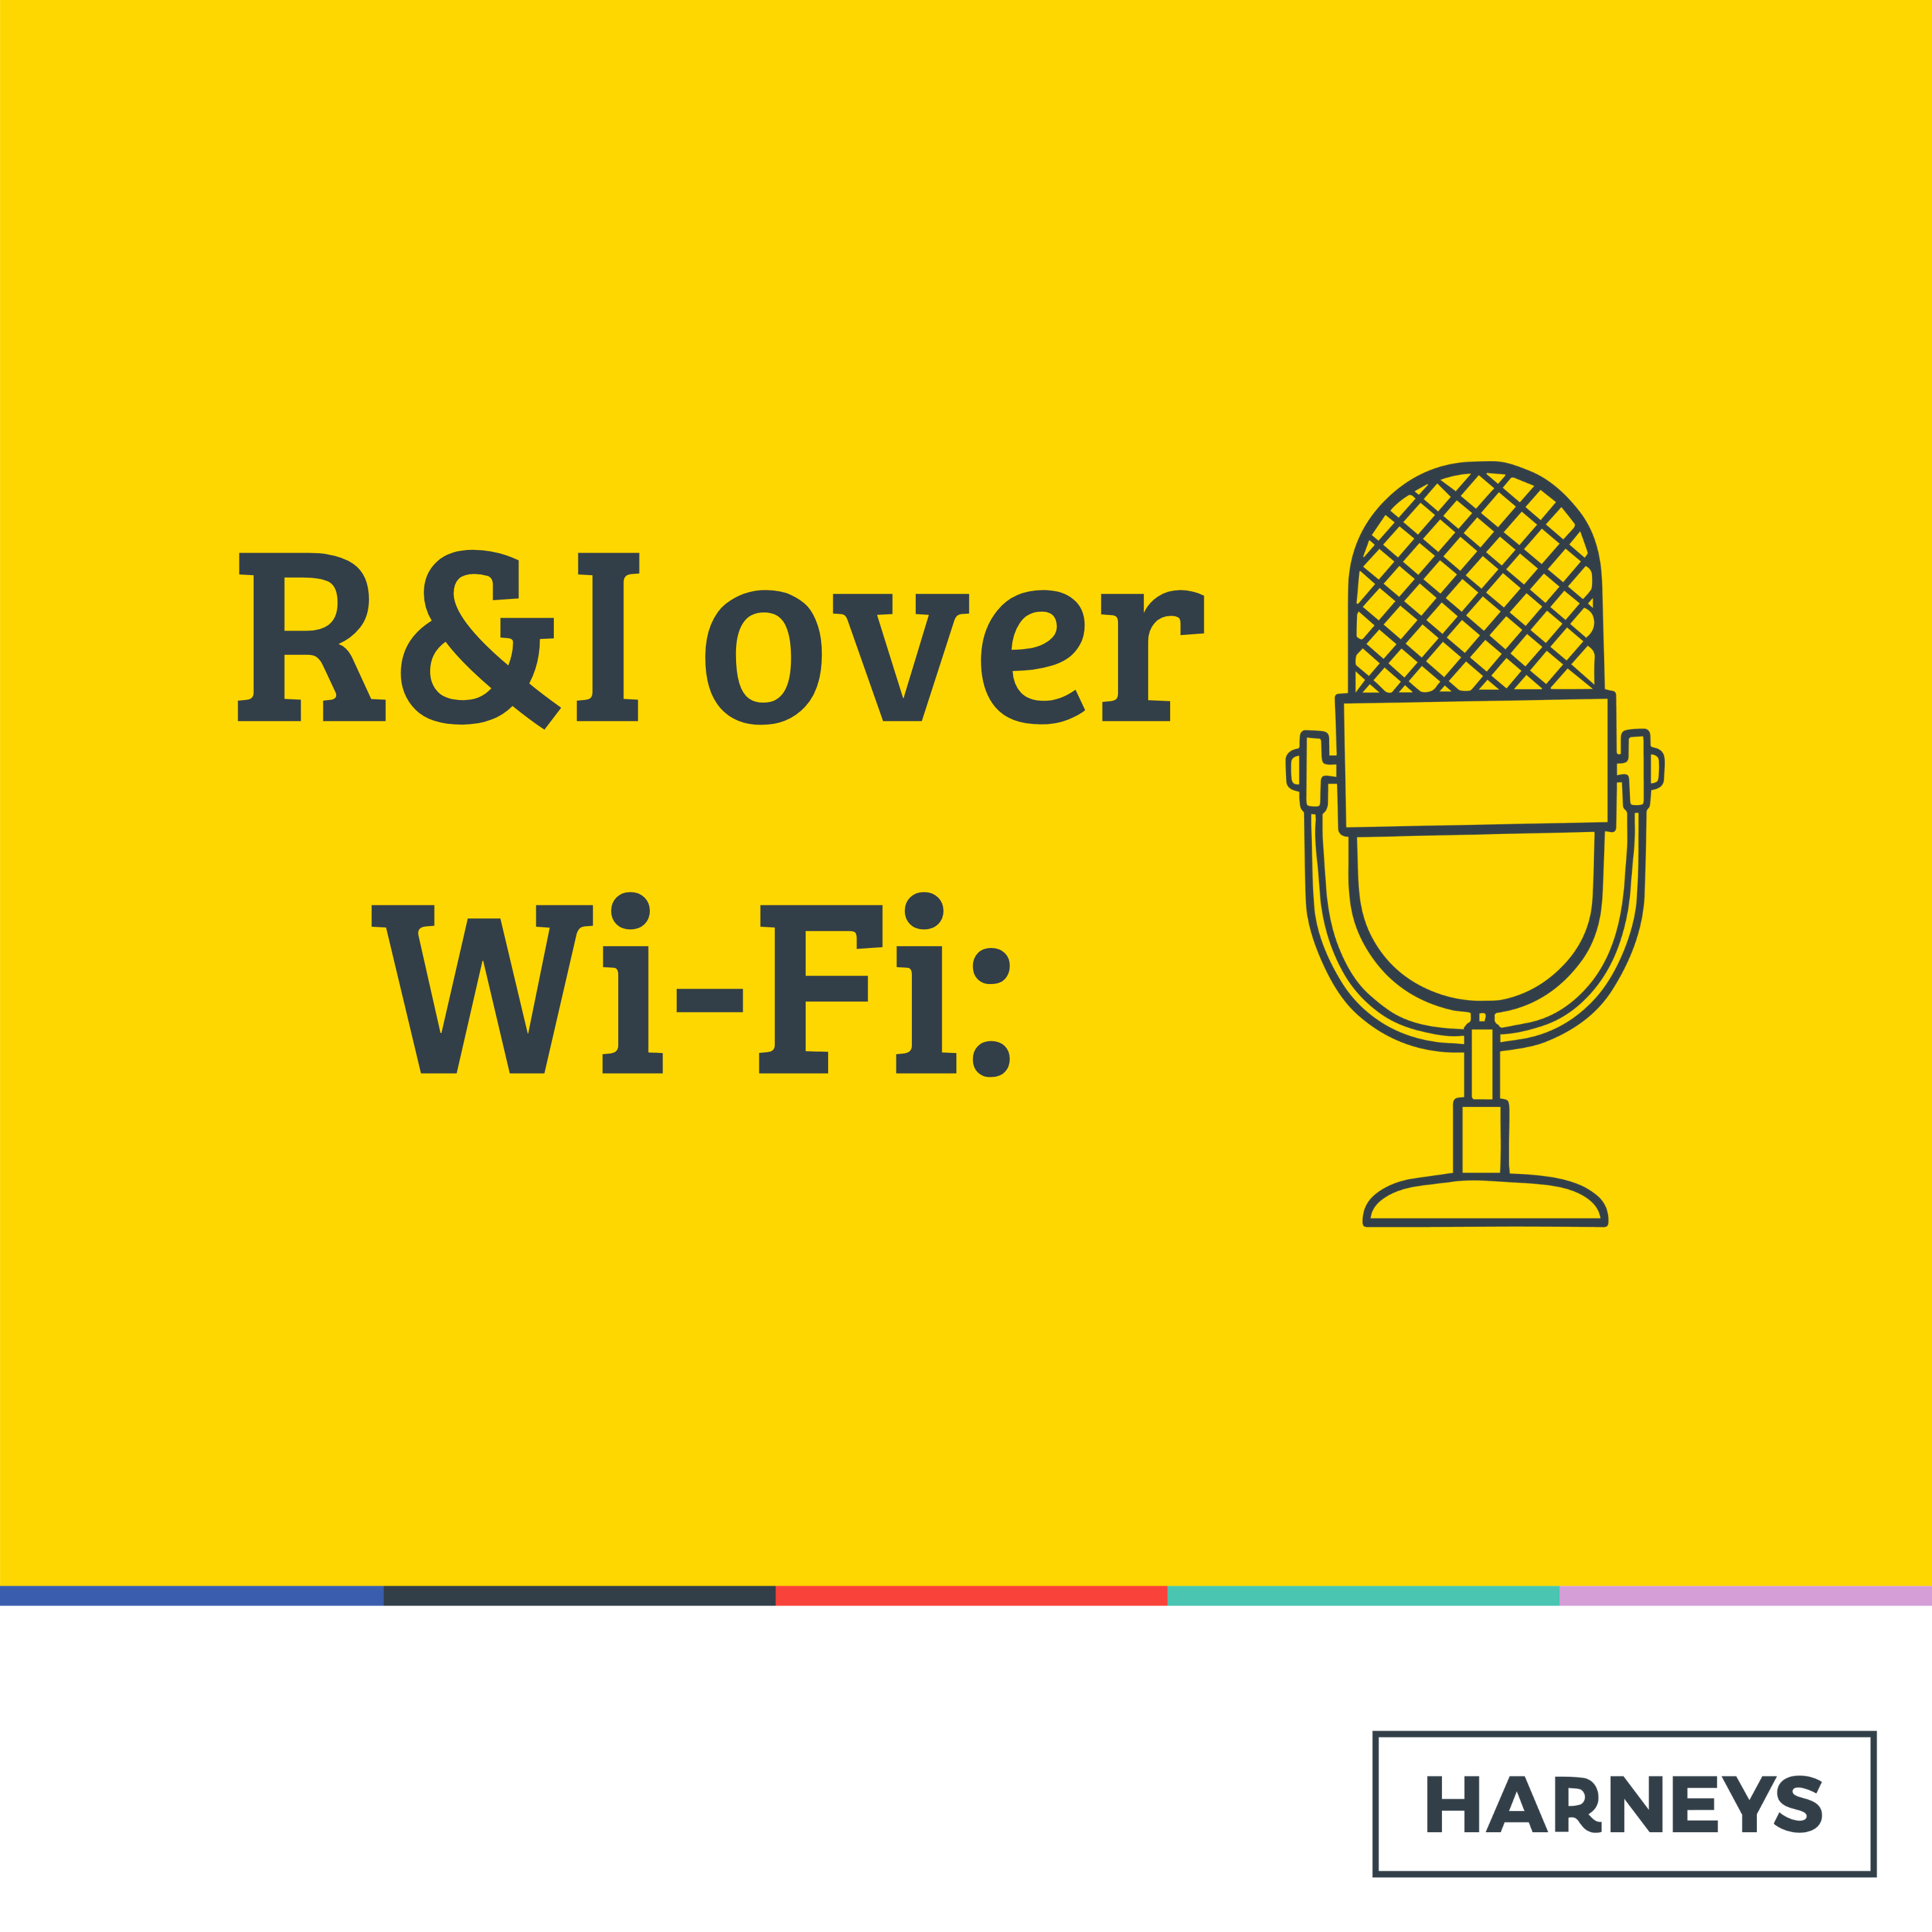 Artwork for R&I over Wi-Fi